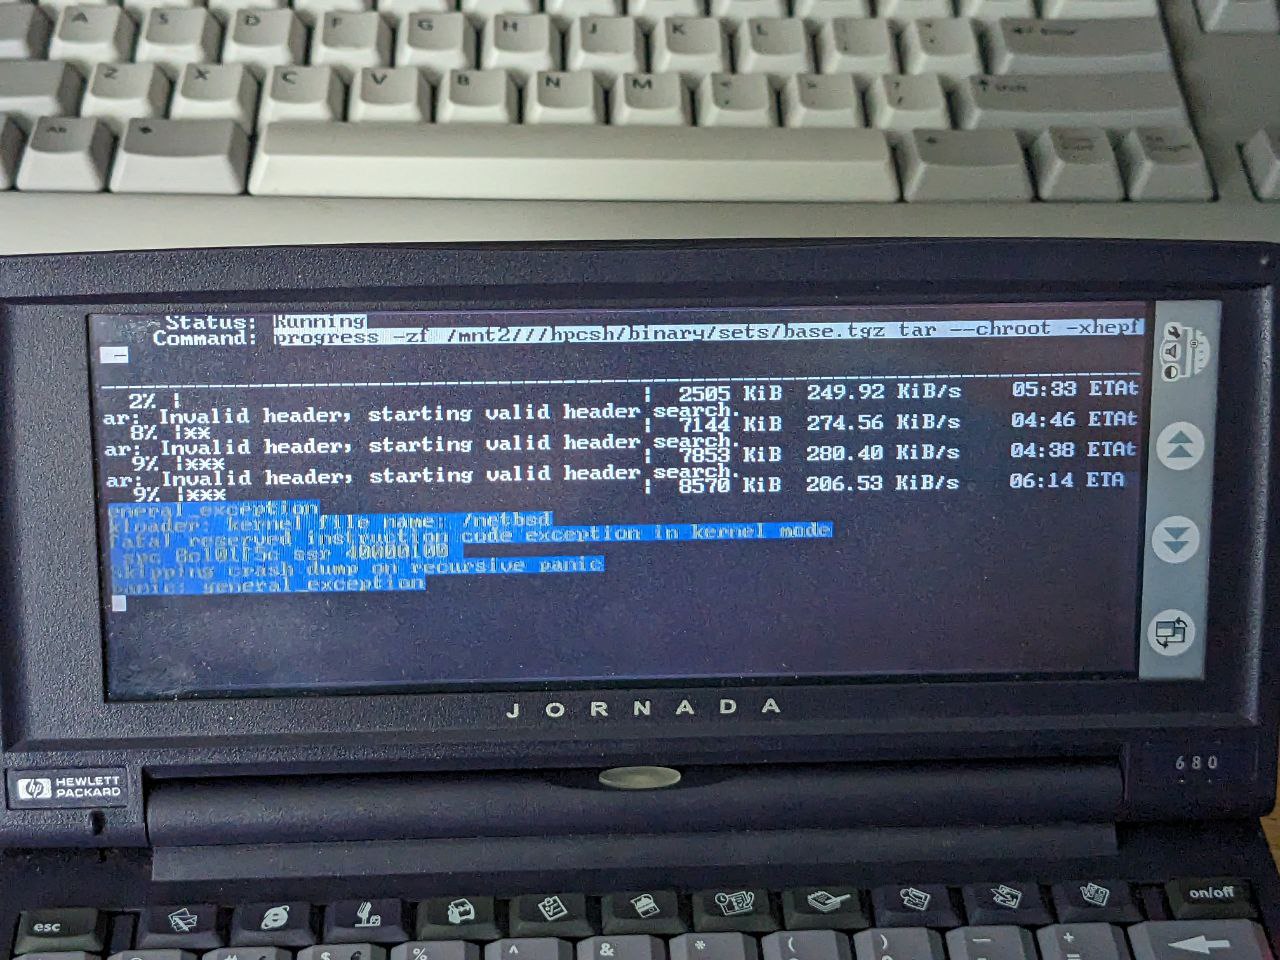 Kernel panic'd extraction